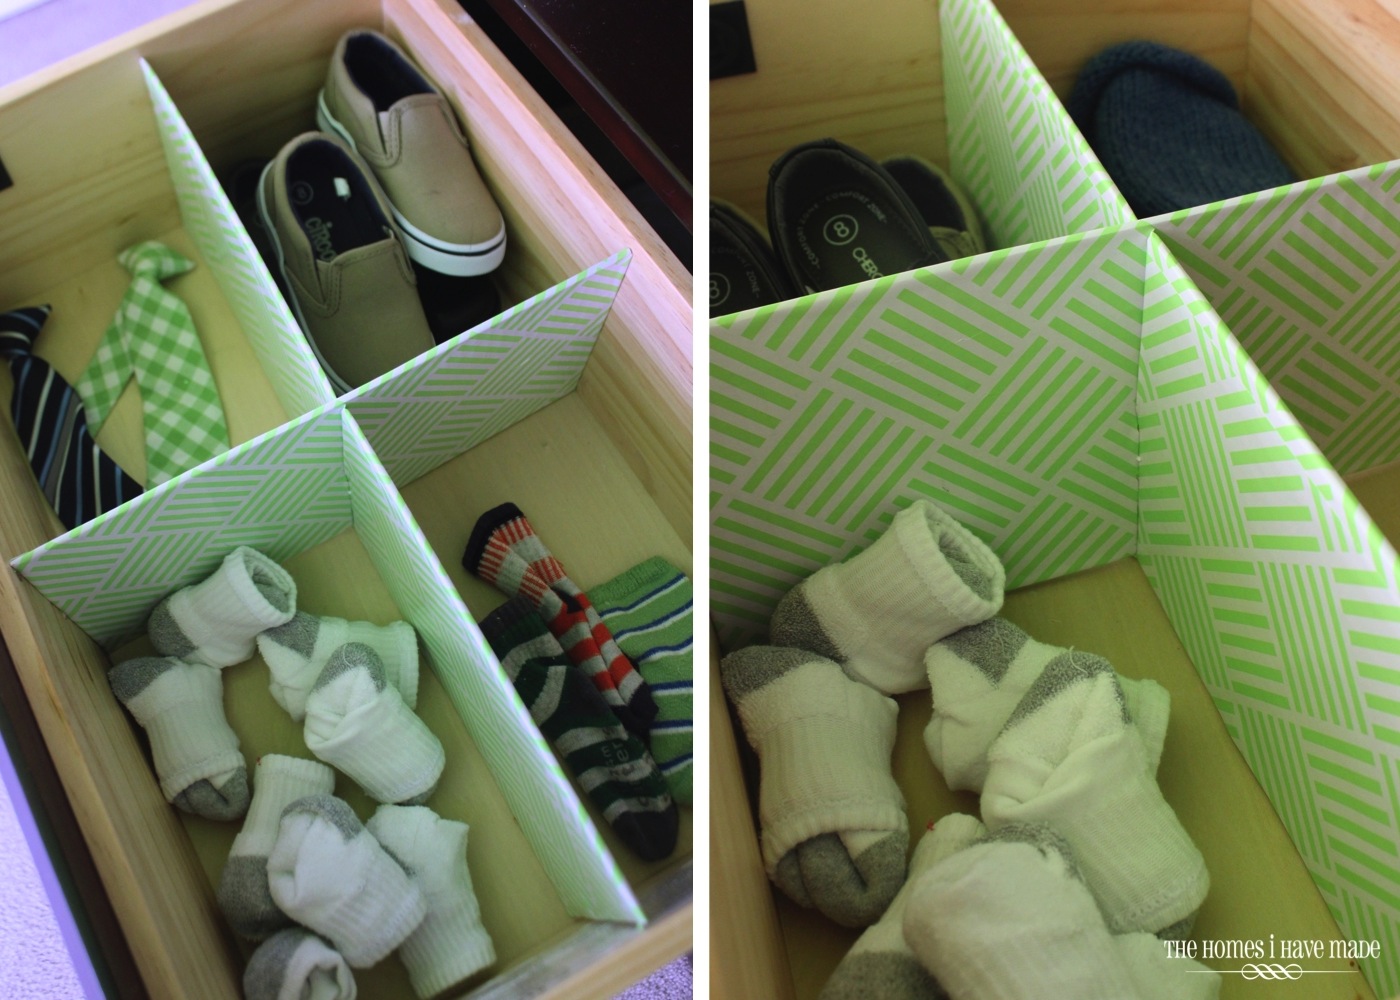 A DIY drawer divider inserted into a drawer. The drawer is filled with socks, shoes and ties.